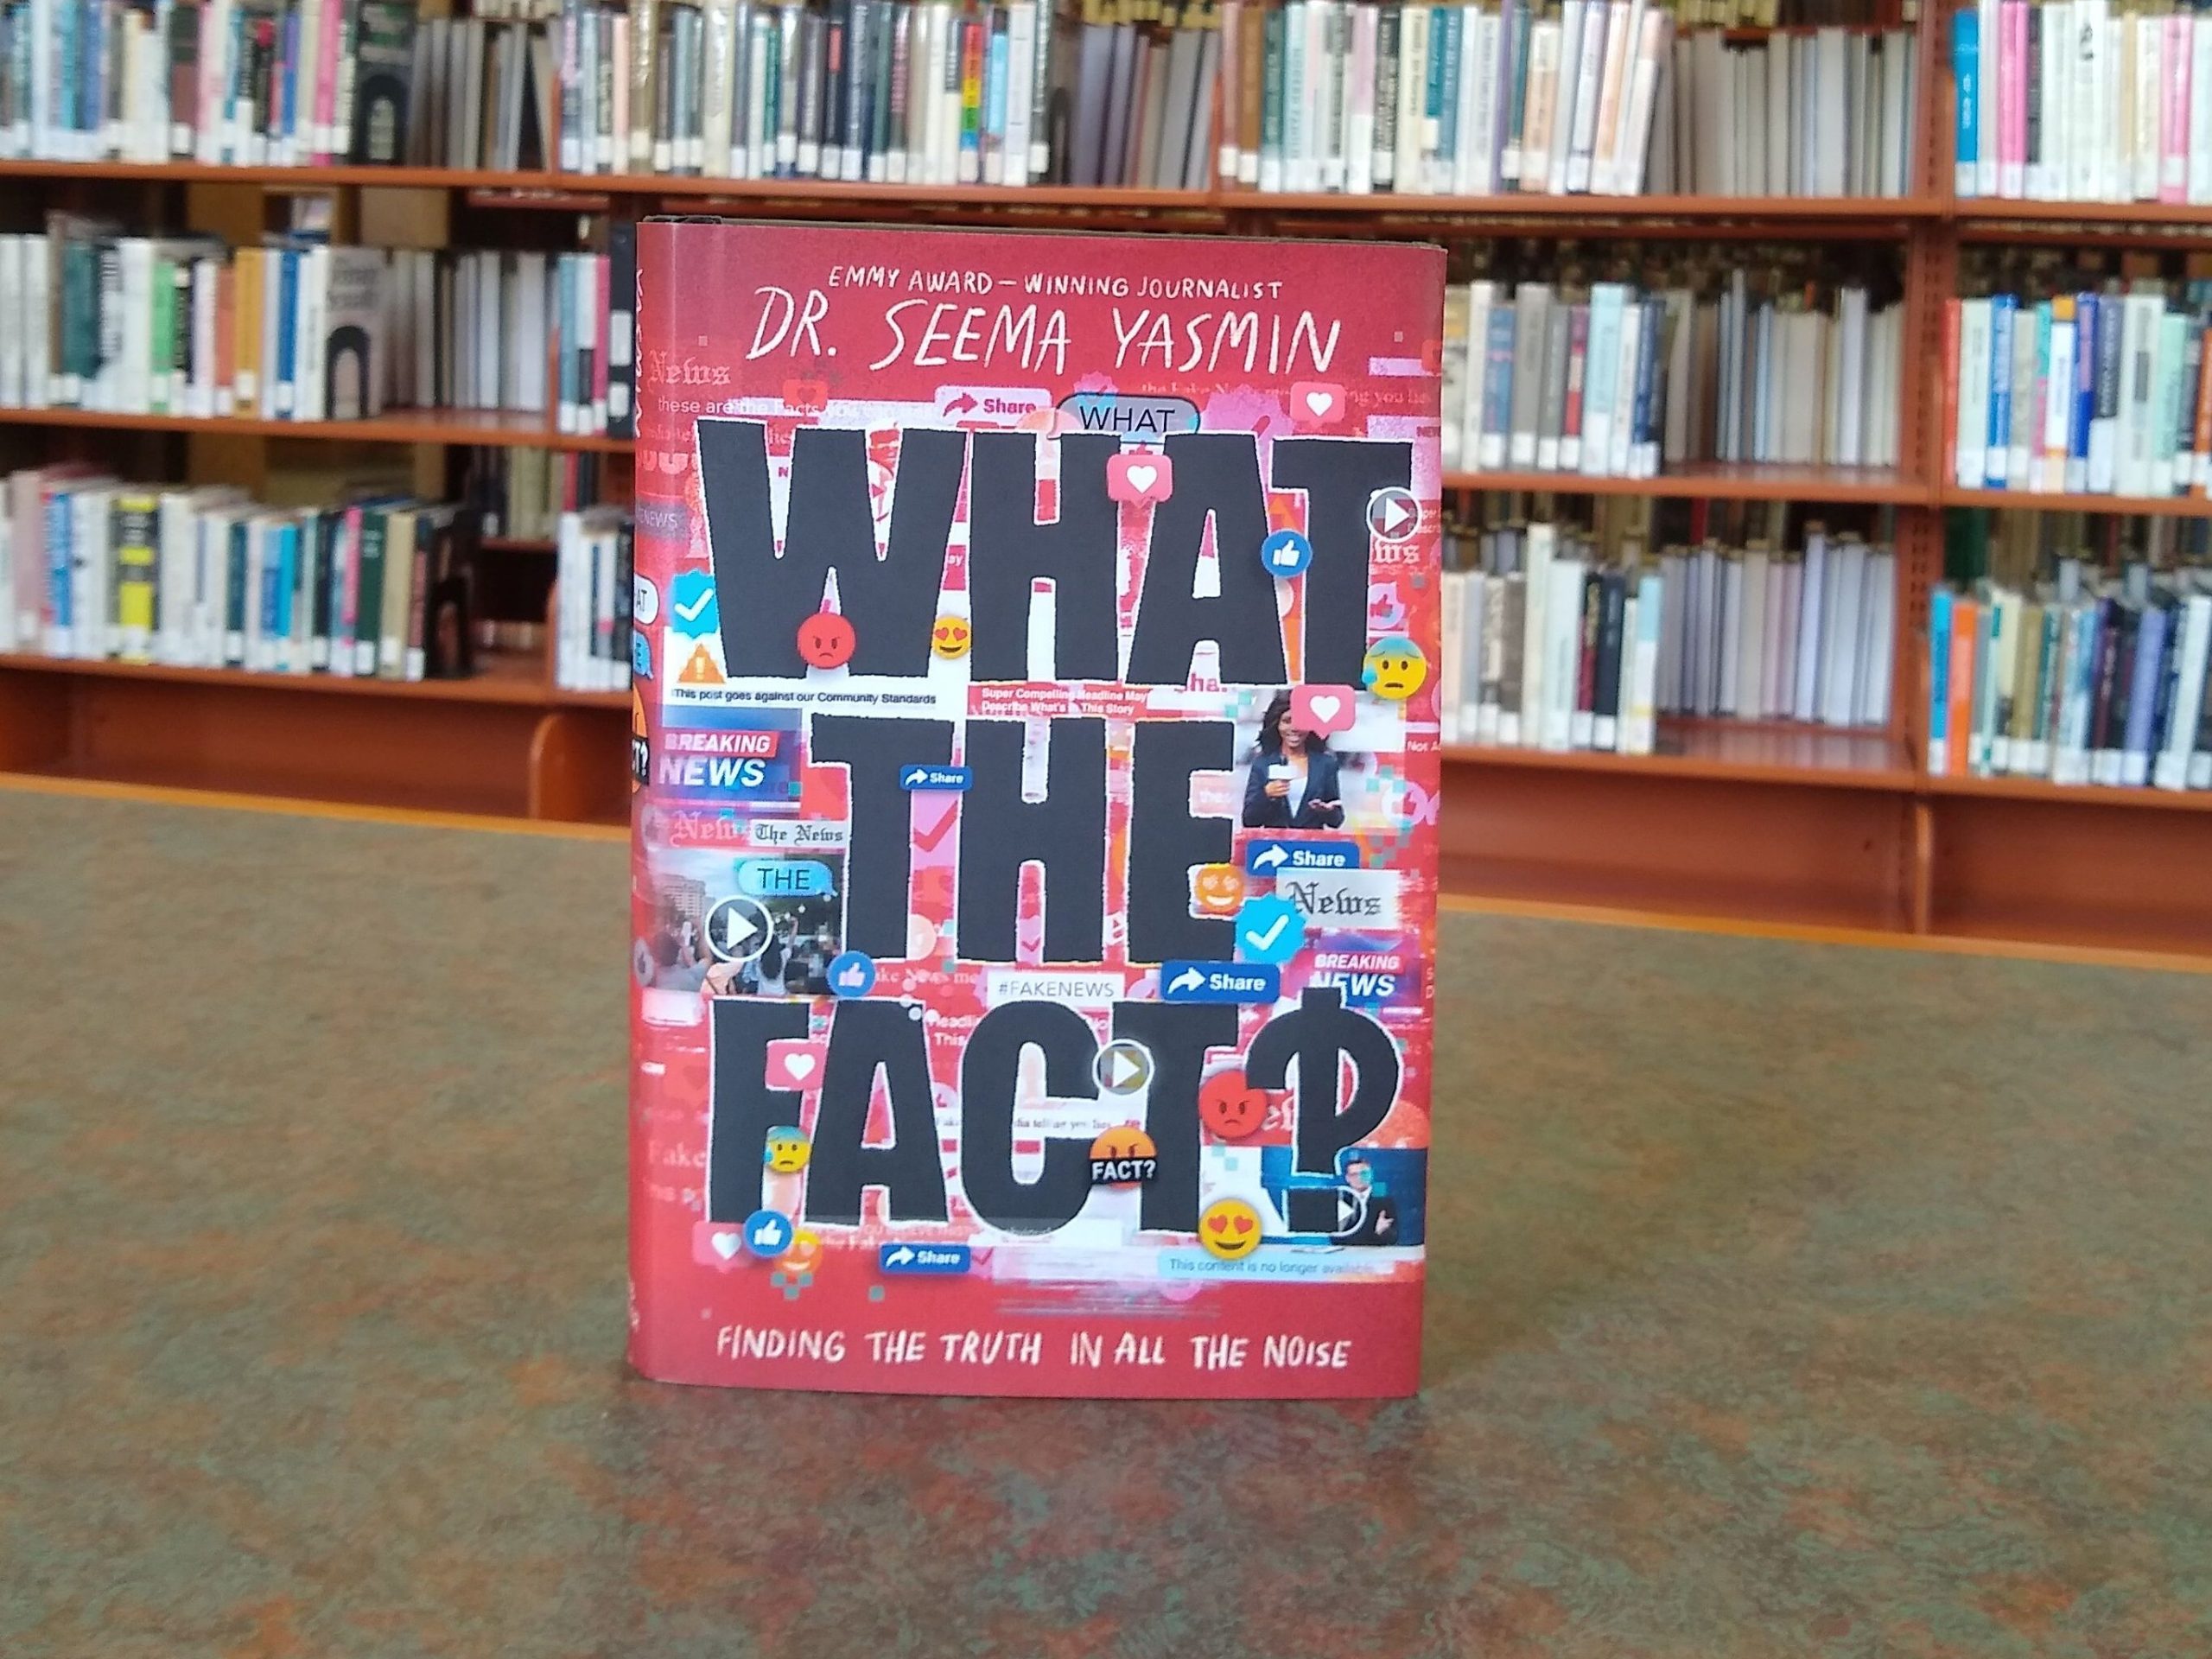 A copy of "What the Fact?!" by Dr. Seema Yasmin sits on a table in the library